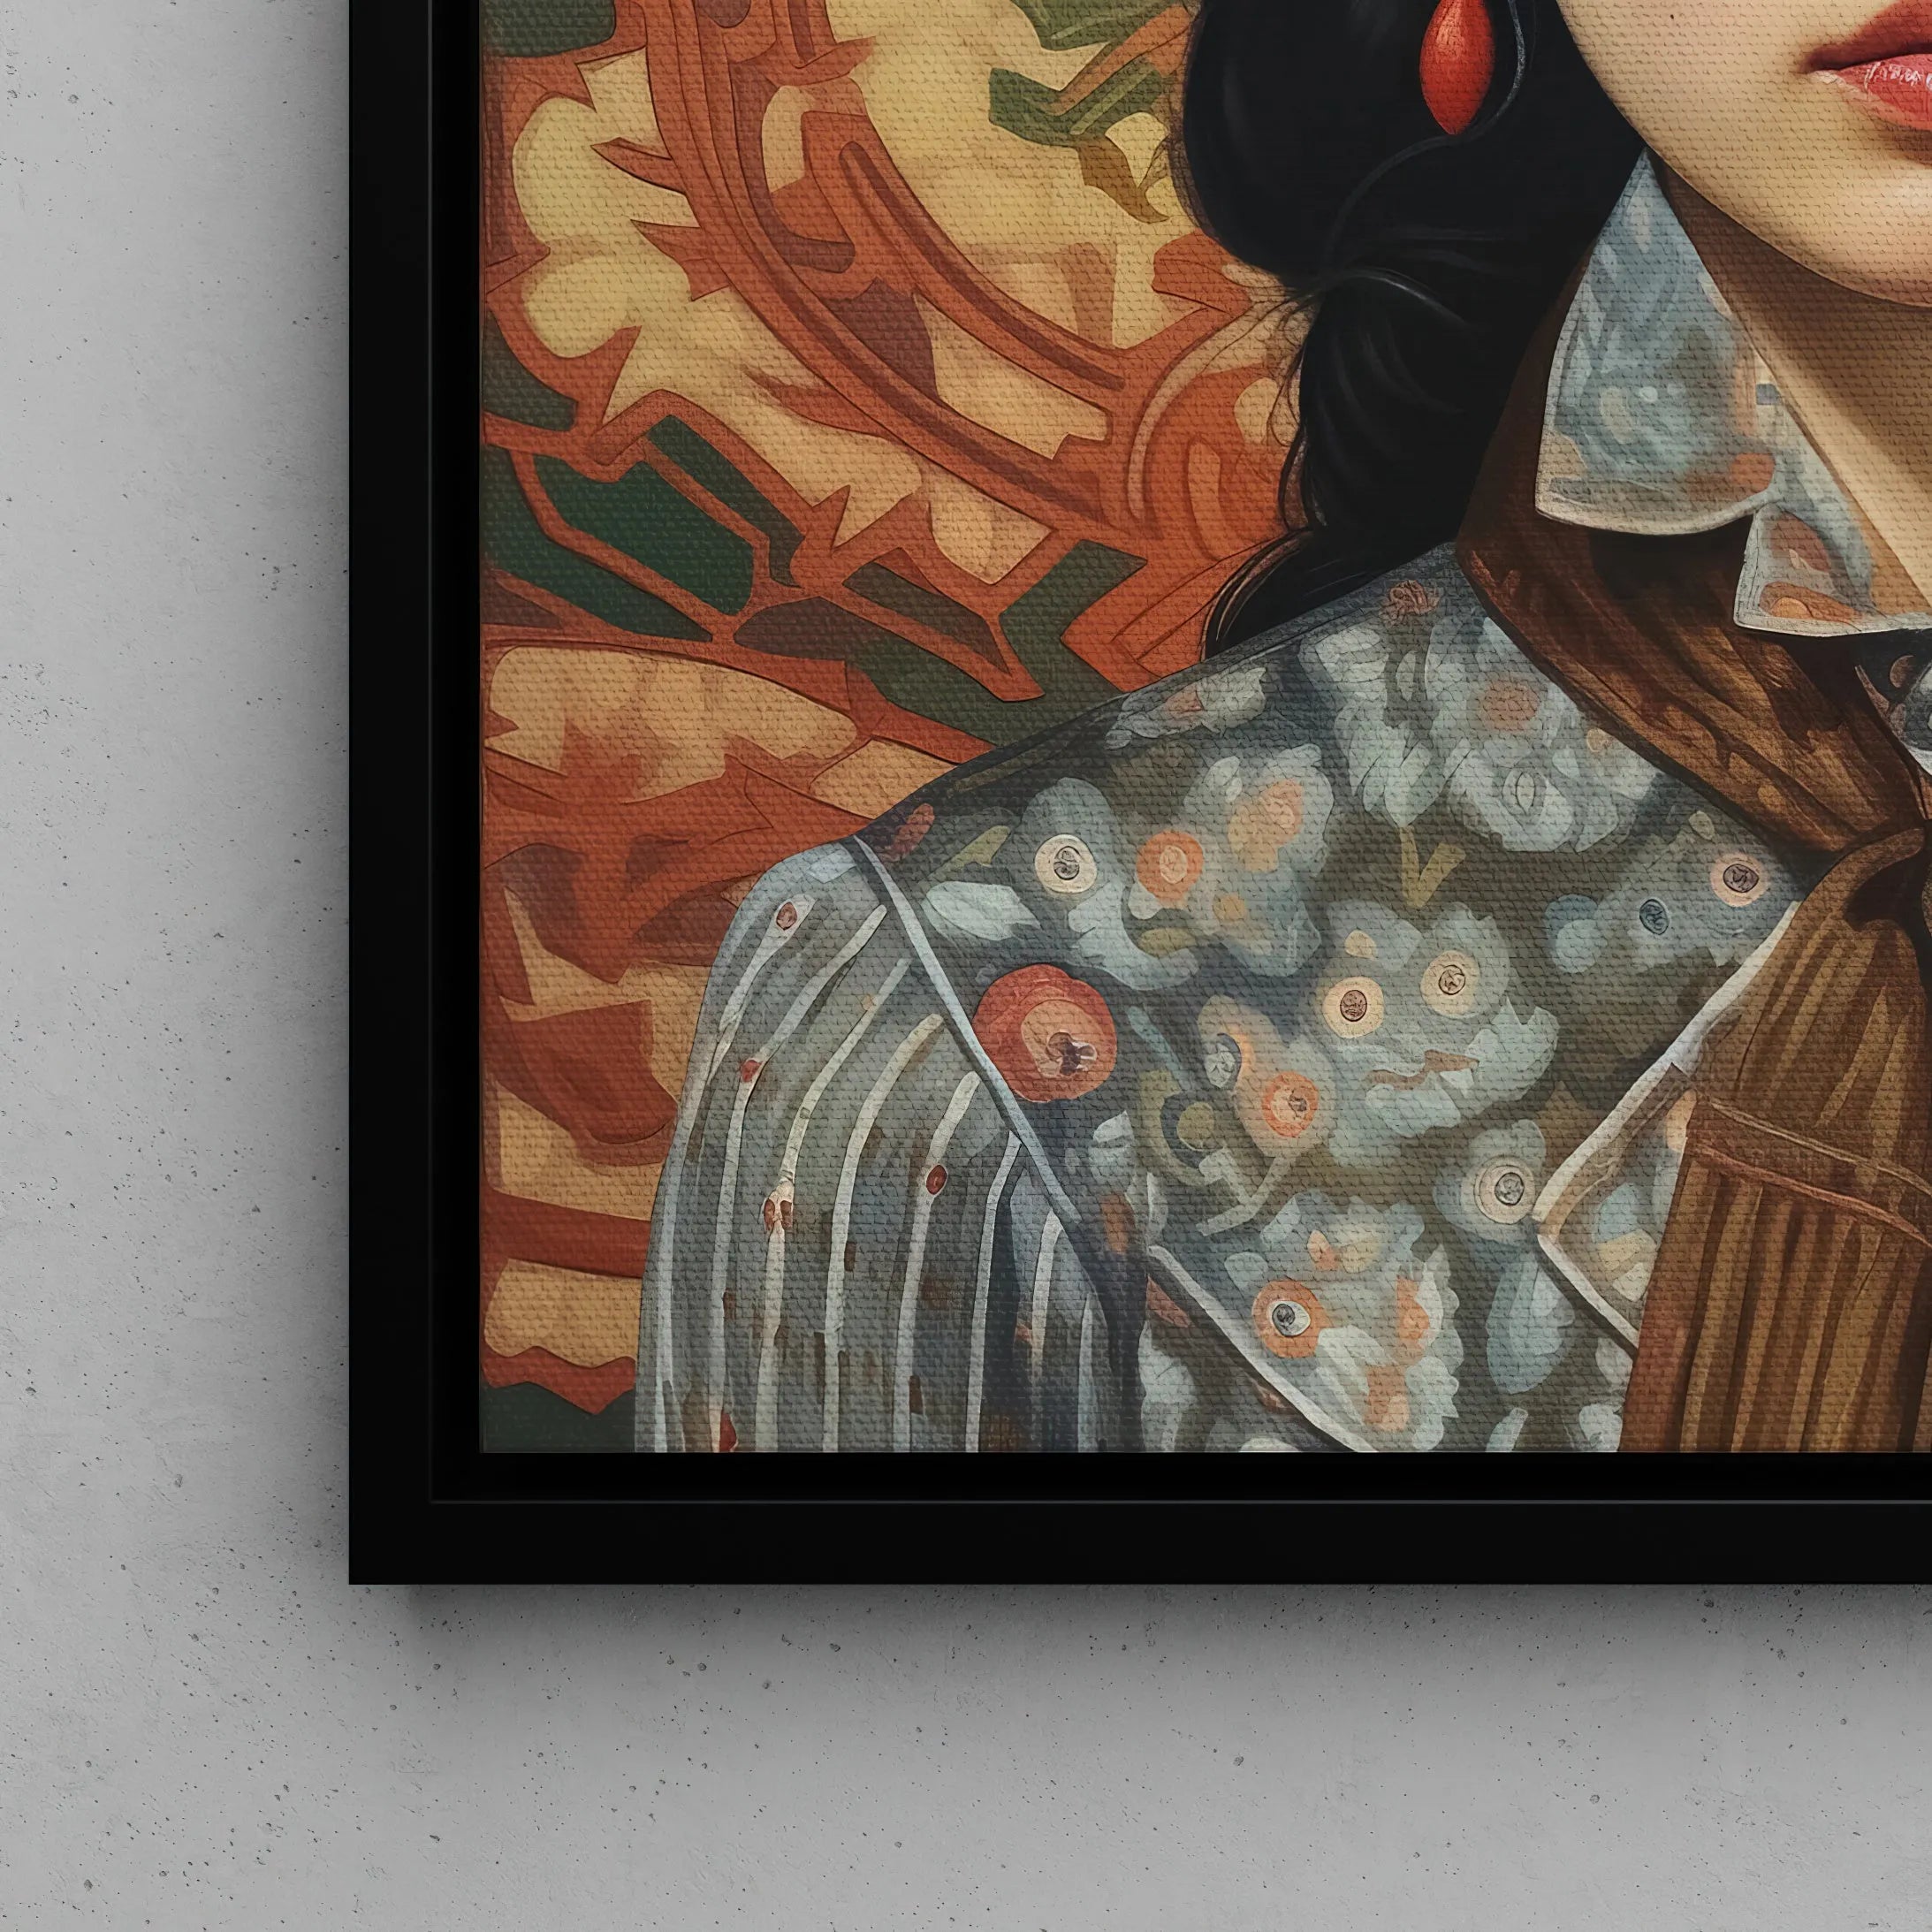 Zhi - Lesbian Chinese Cowgirl Framed Canvas - Sapphic Art - Posters Prints & Visual Artwork - Aesthetic Art